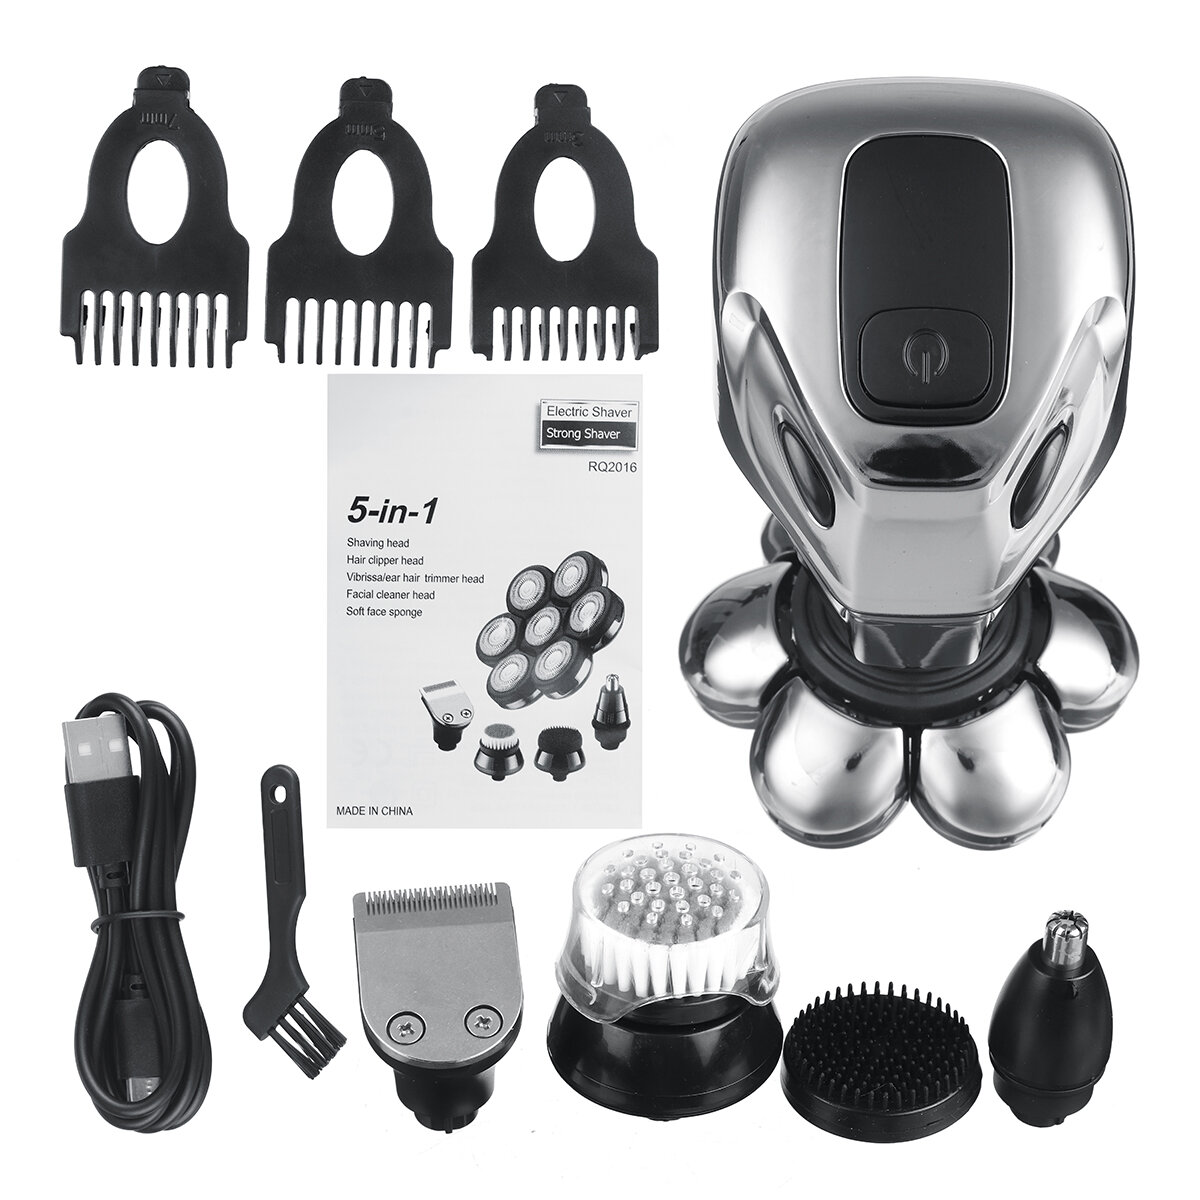 

5 in 1 7D Electric Rotary Shaver Wet & Dry Razor Men Bald Head Shavers USB Rechargeable Nose & Ear Hair Trimmer Facial C